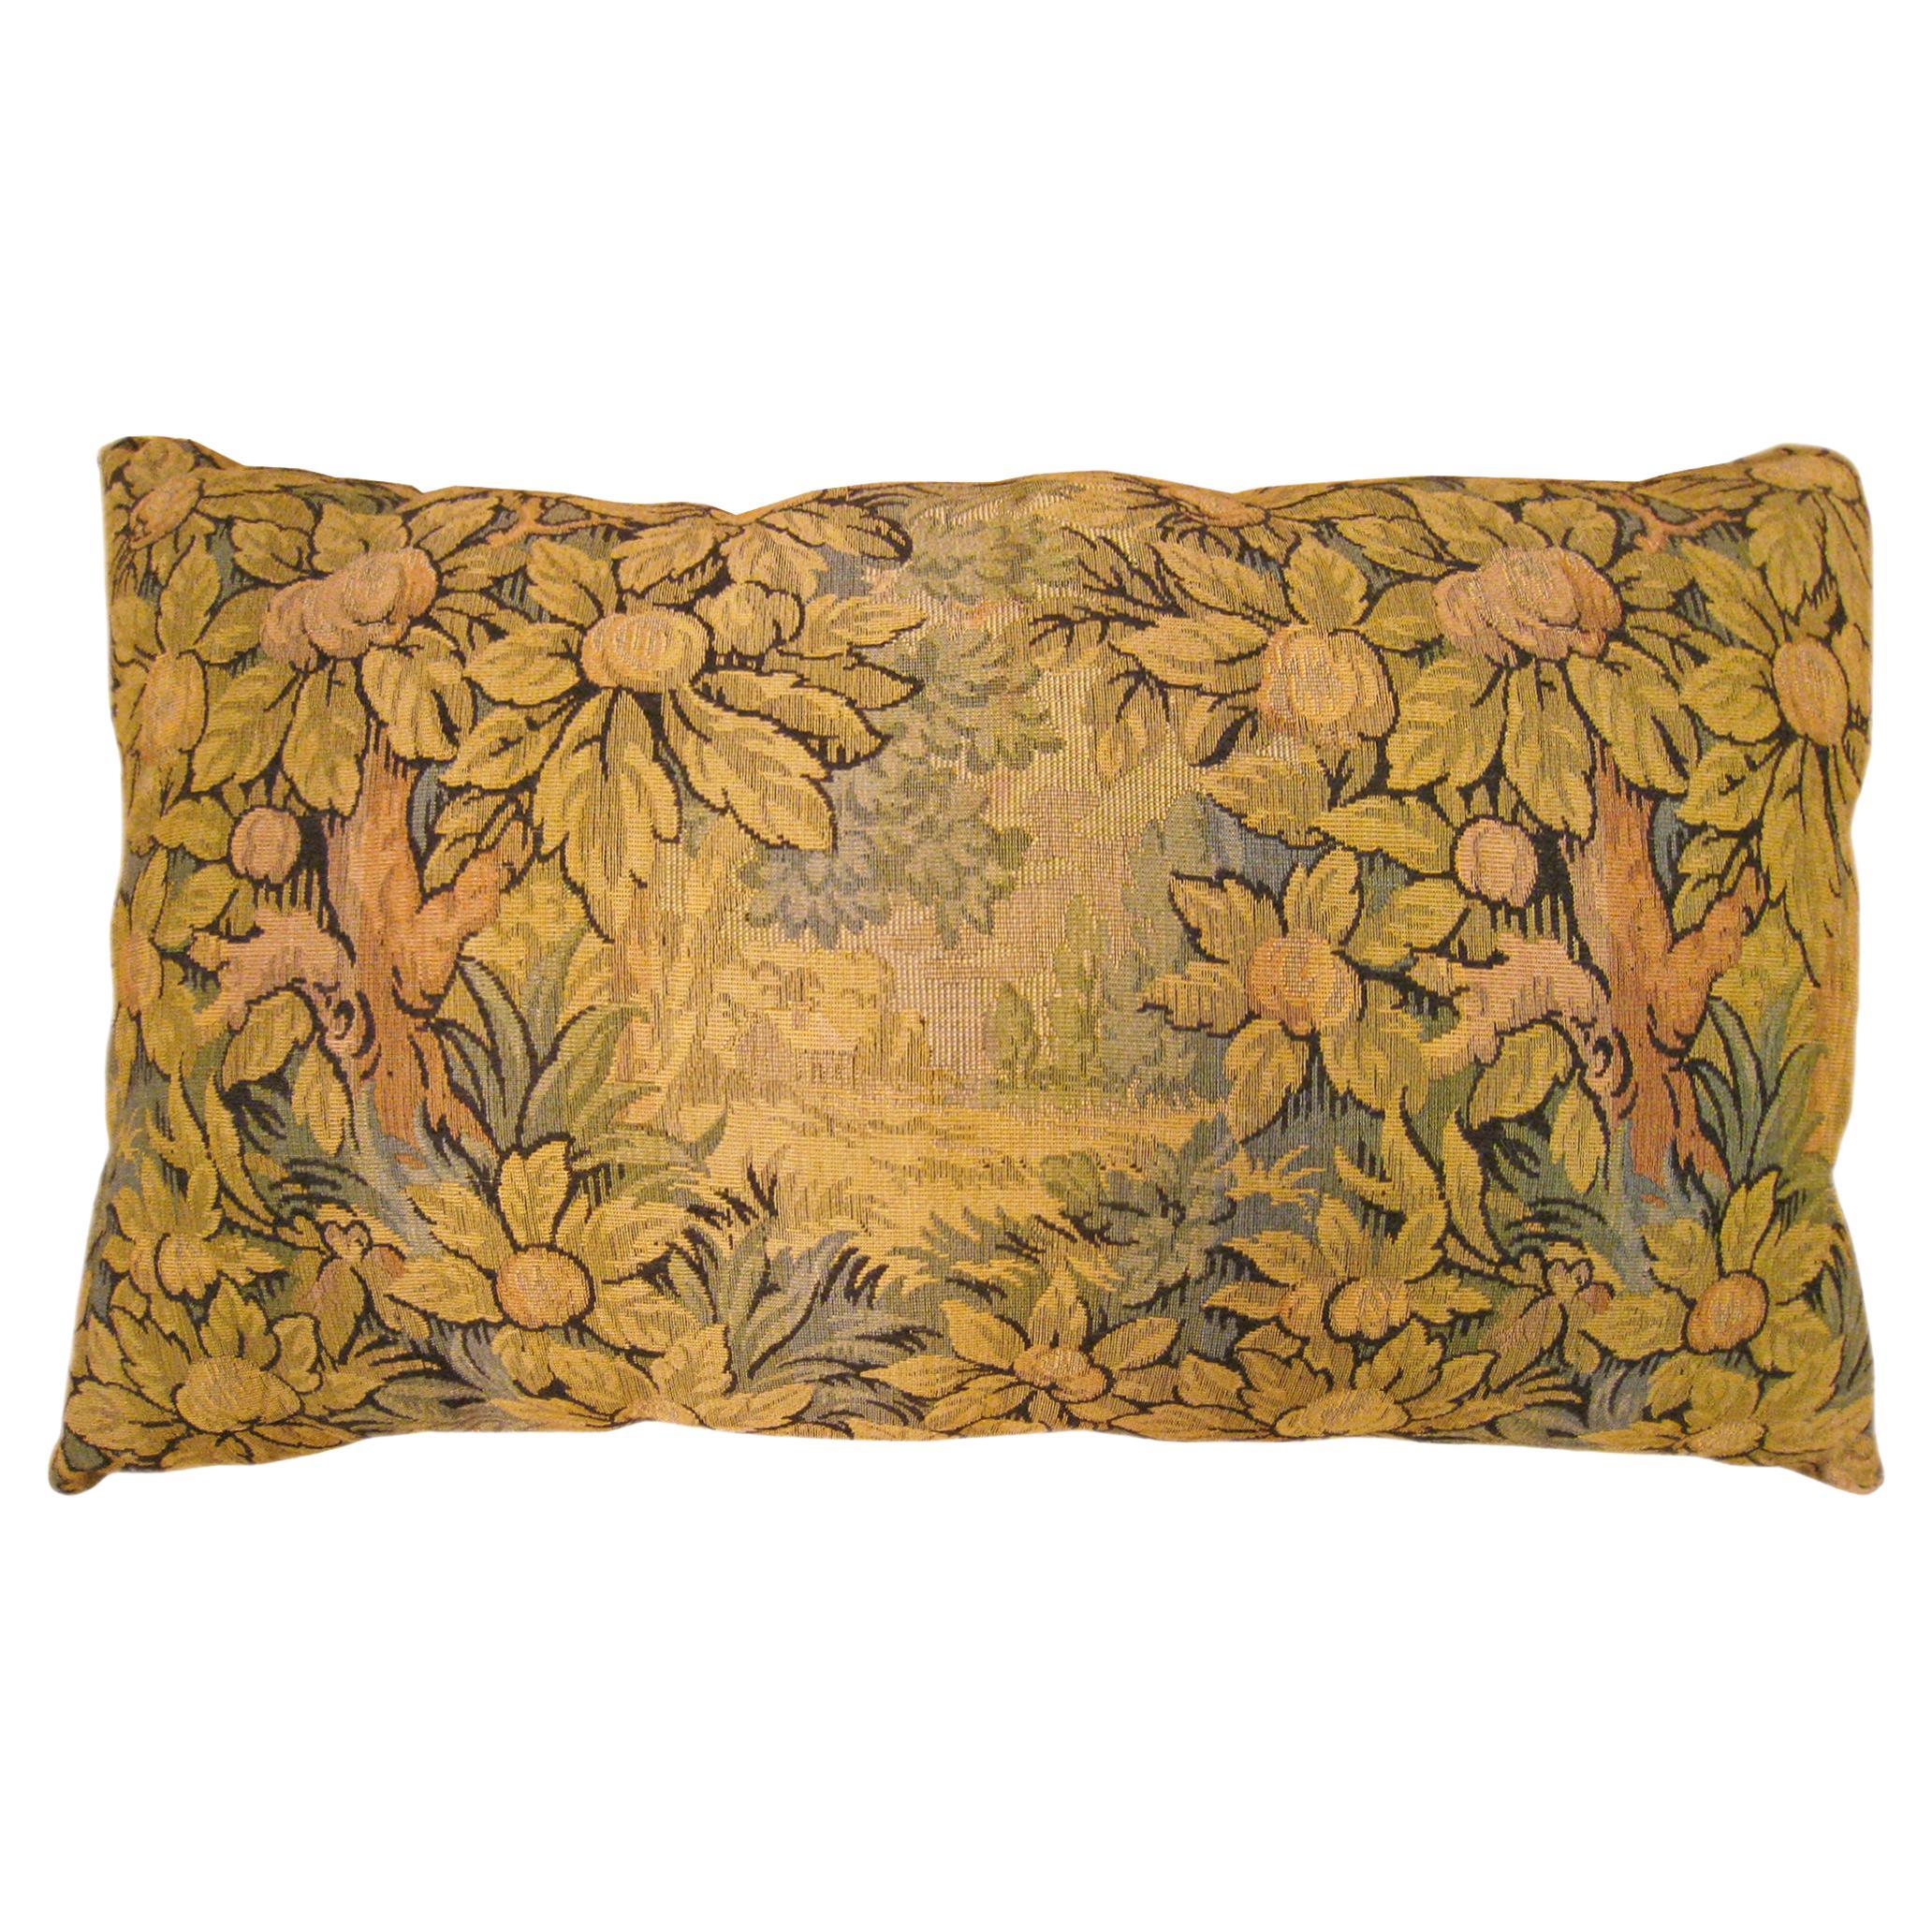 Decorative Antique Jacquard Tapestry Pillow with Trees Allover For Sale